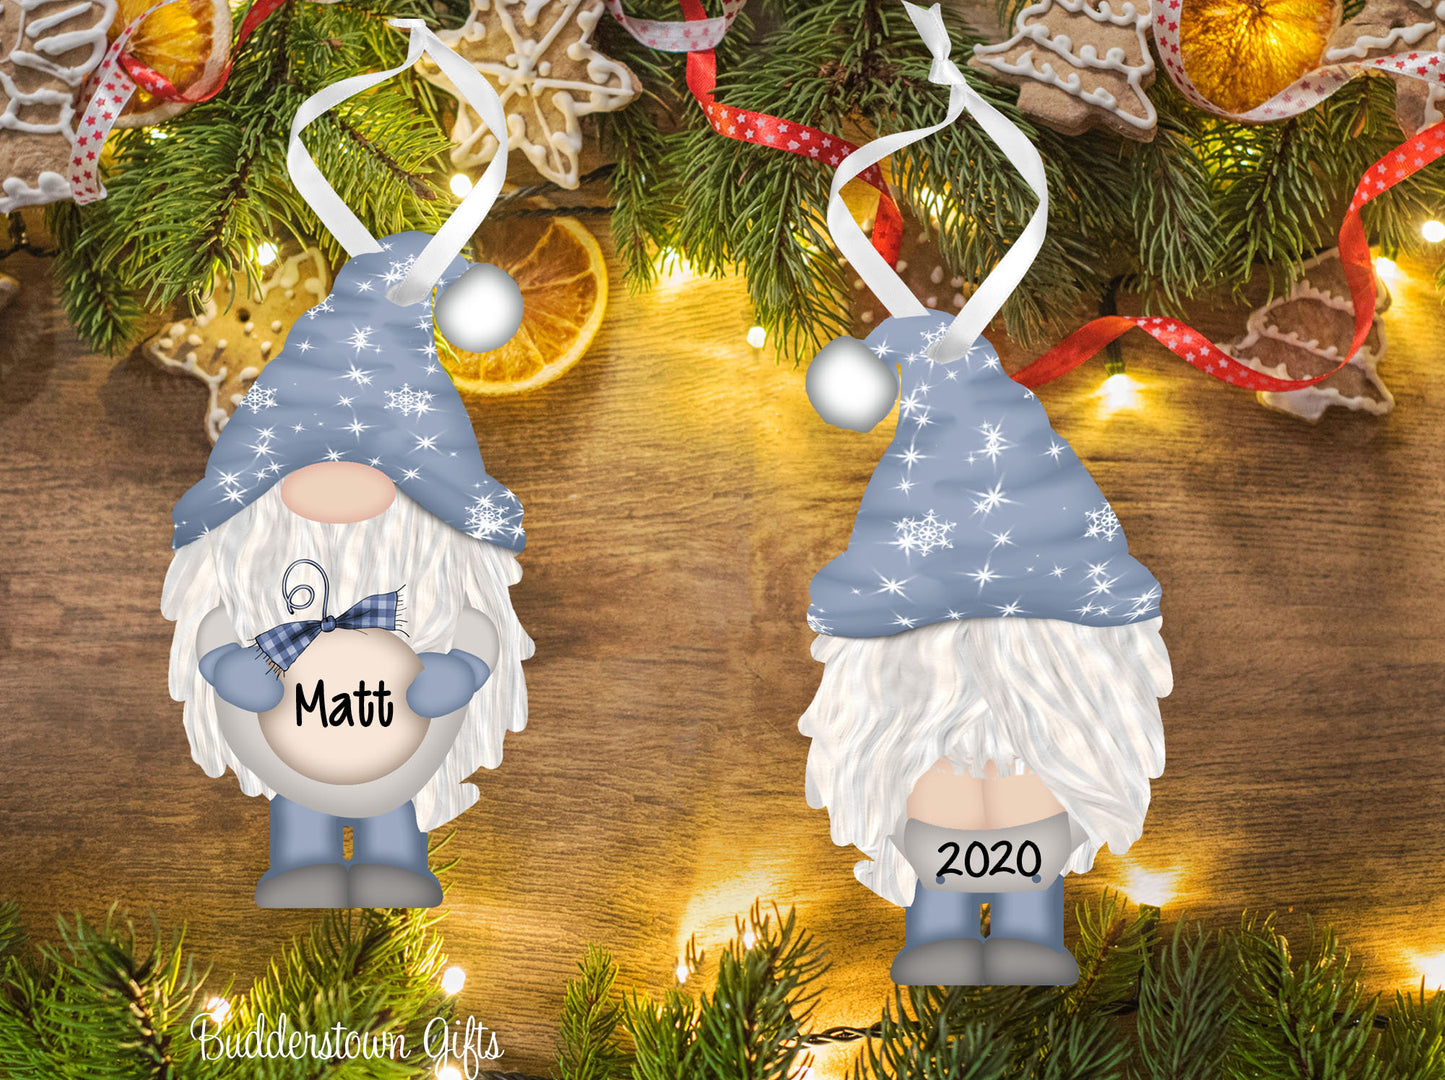 Holiday / Christmas GNOME Ornaments - 4 Color Choices